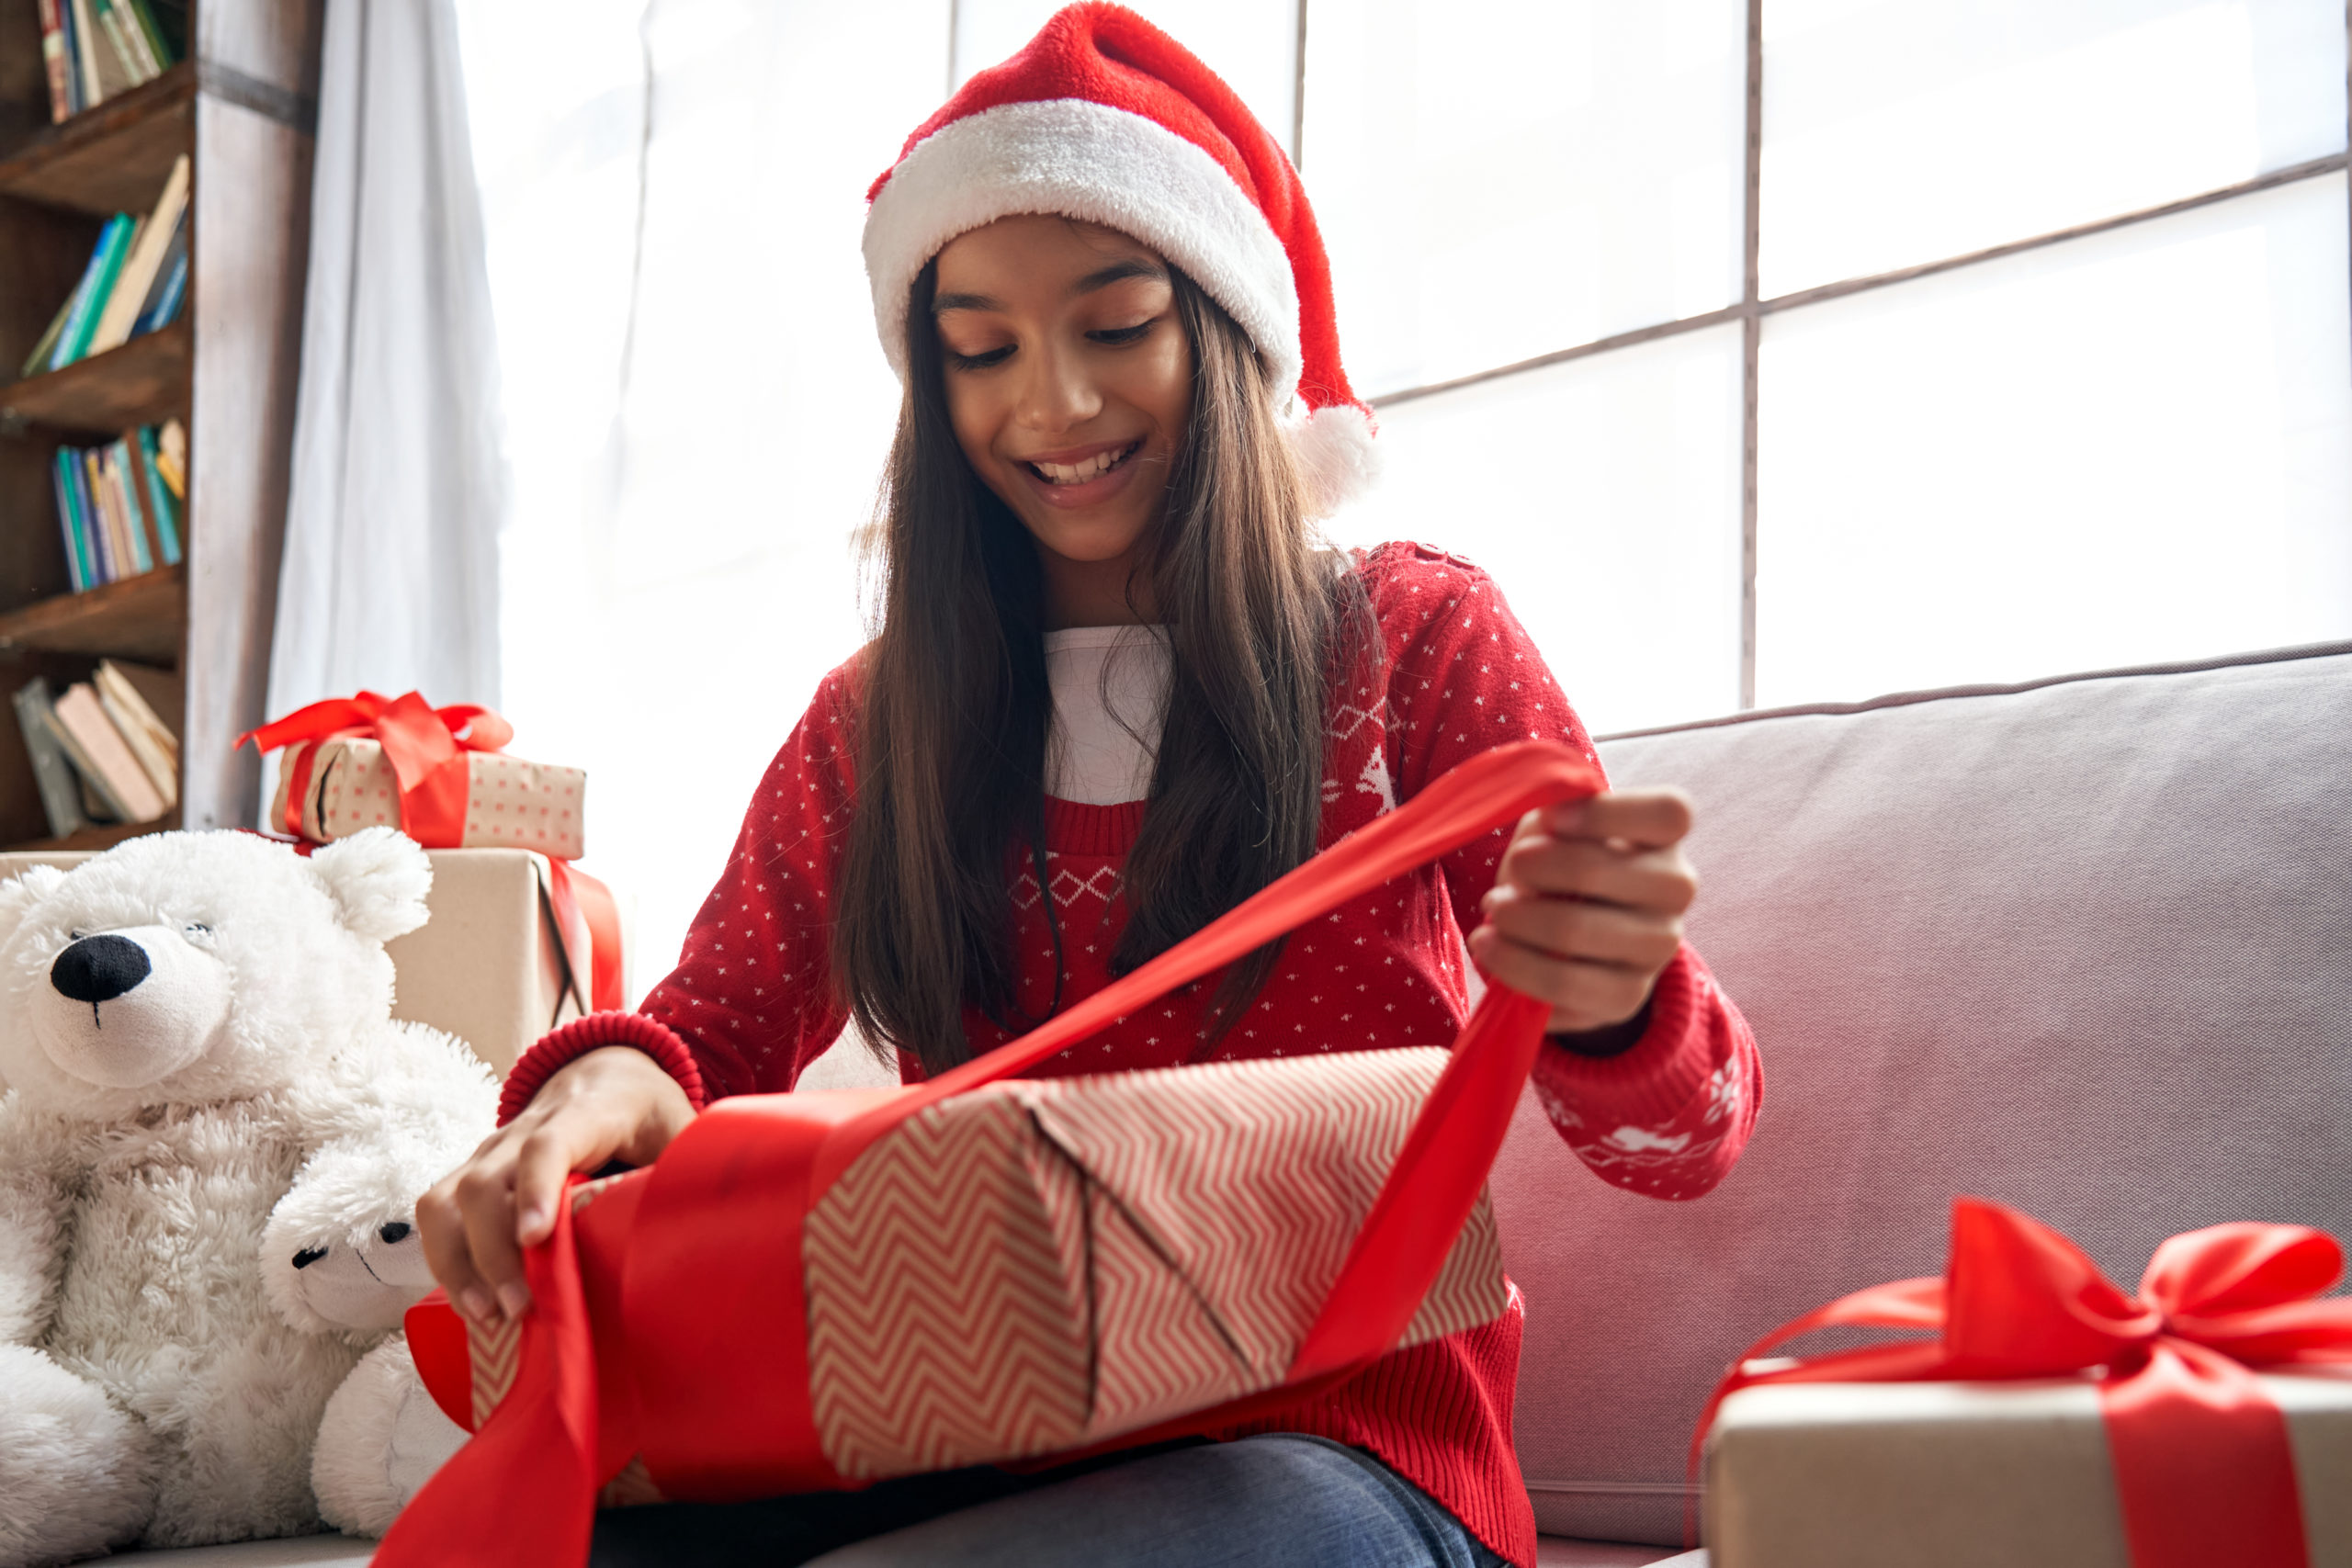 Happy indian kid girl unties red ribbon opens Christmas gift box at home. Smiling cute latin child wearing santa hat receiving xmas New Year present sitting on couch celebrating winter holidays.